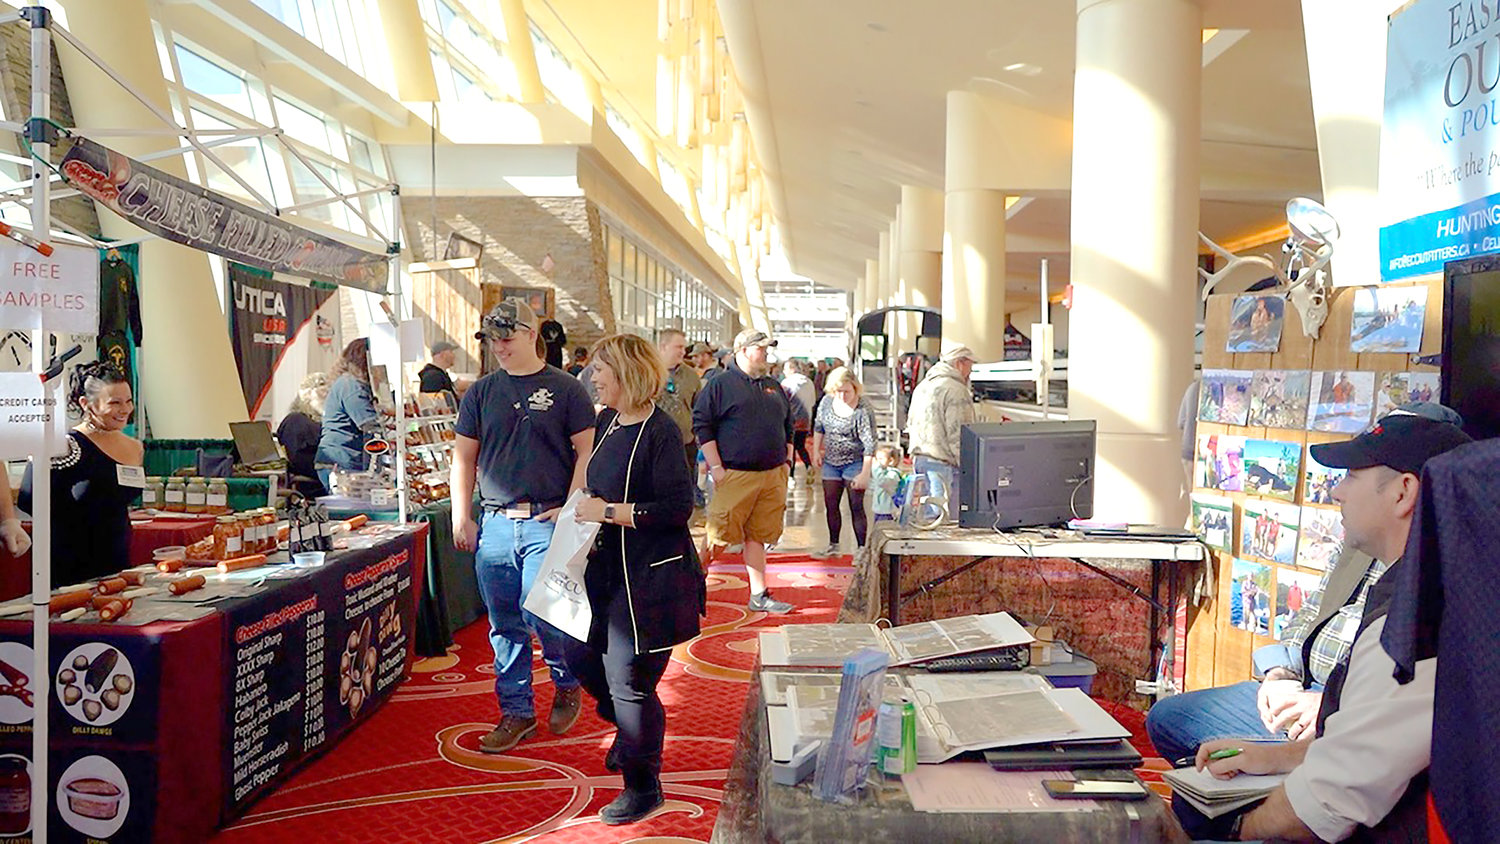 The Big East Camping &amp; Outdoor Sports Show returns from March 10-12  in the Event Center at Turning Stone Resort Casino in Verona. Hours are 2 to 7 p.m. Friday; 9 a.m. to 6 p.m. Saturday and 9 a.m. to 4 p.m. Sunday.